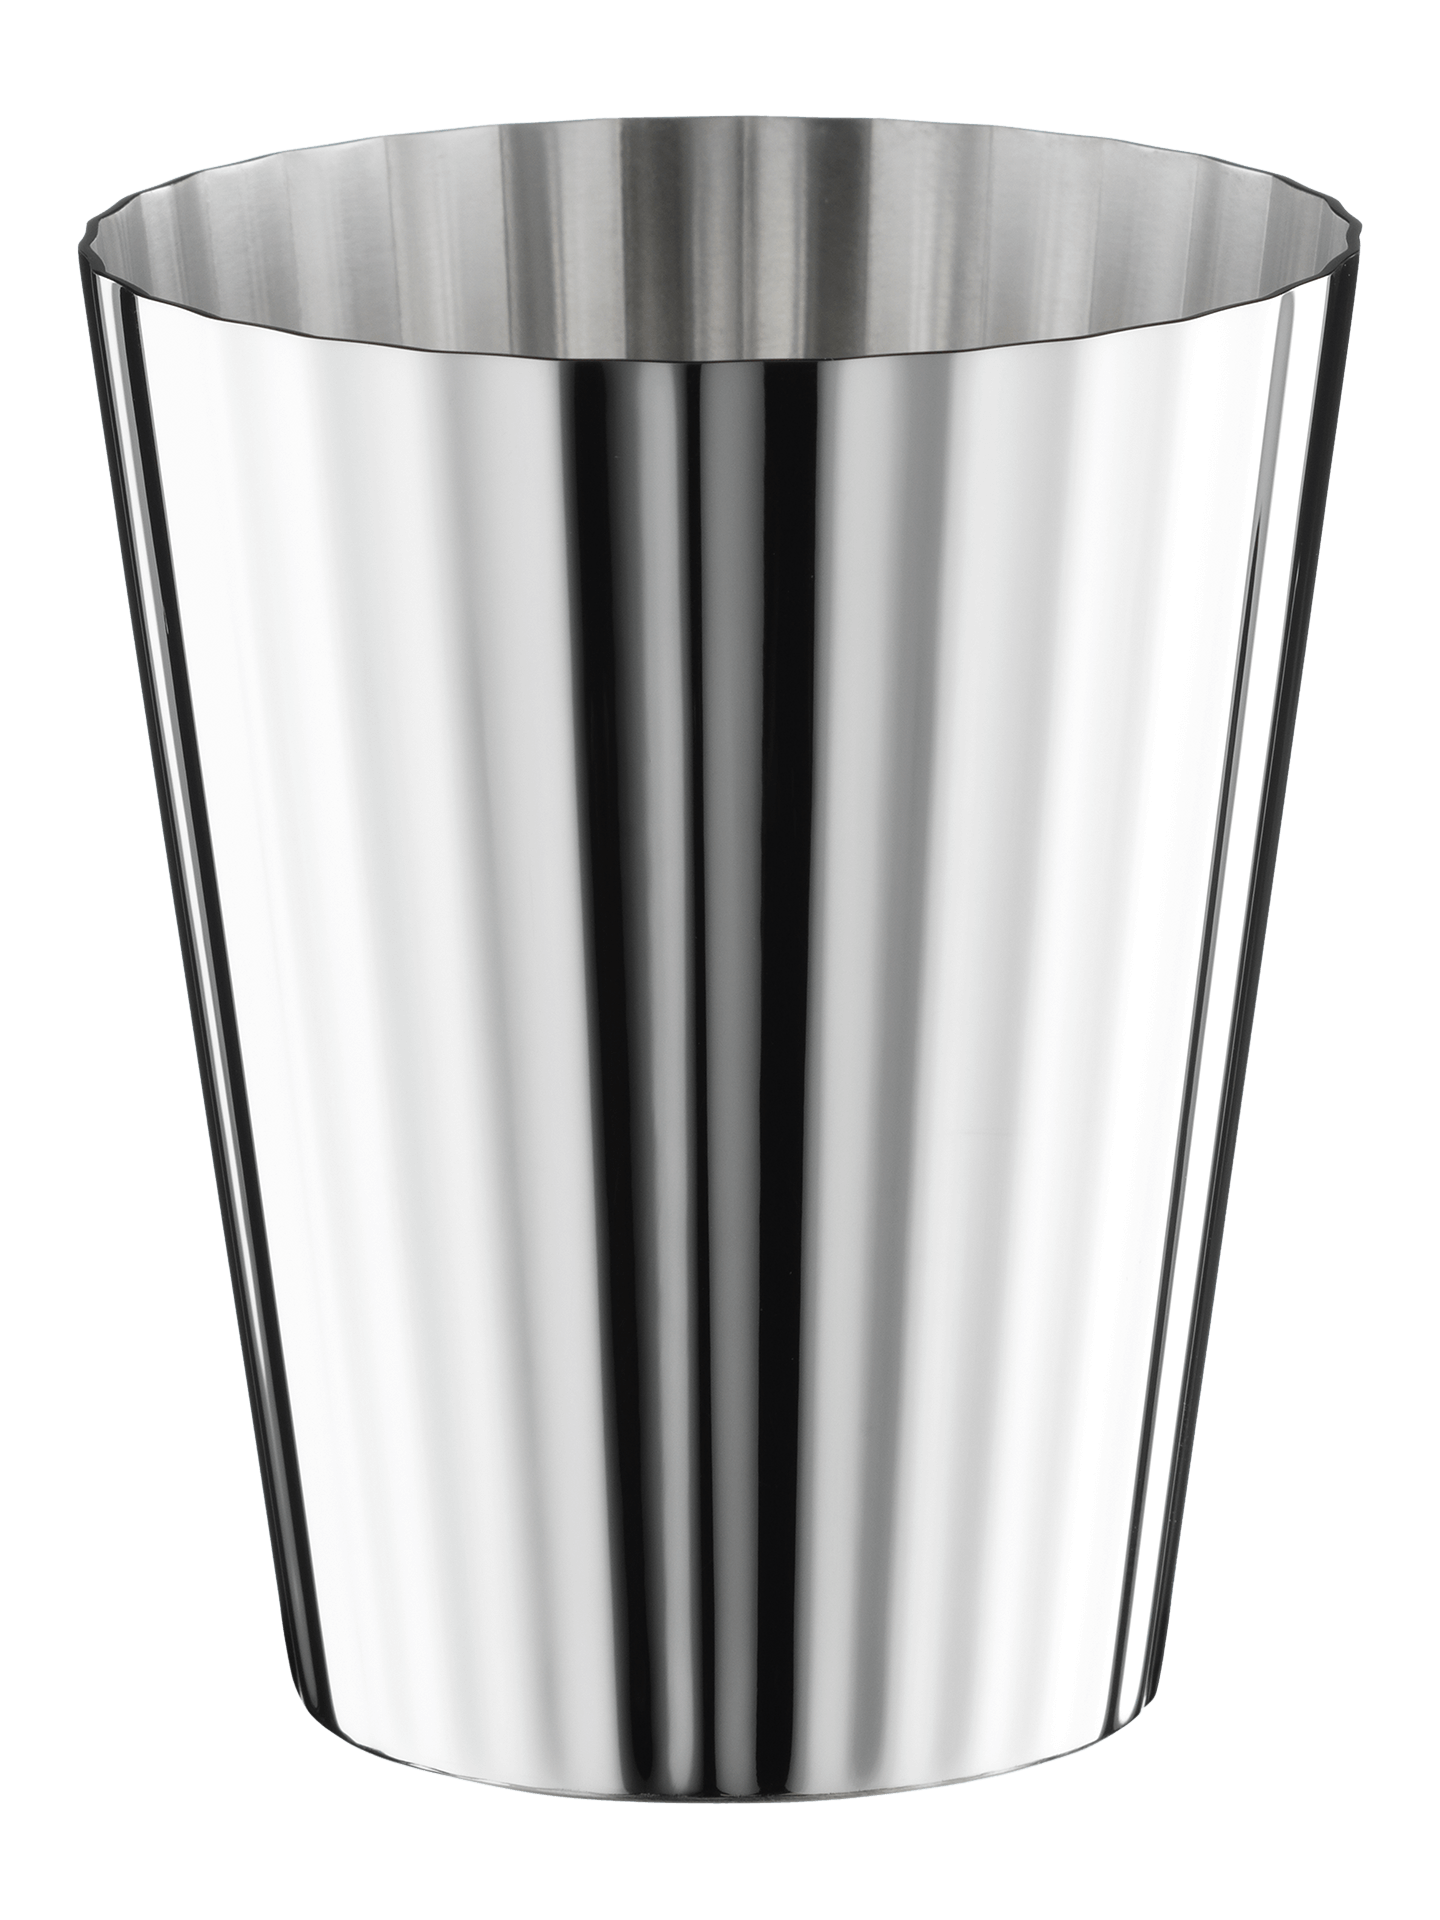 Belvedere Gin, water, wine tumbler (90g silverplated)